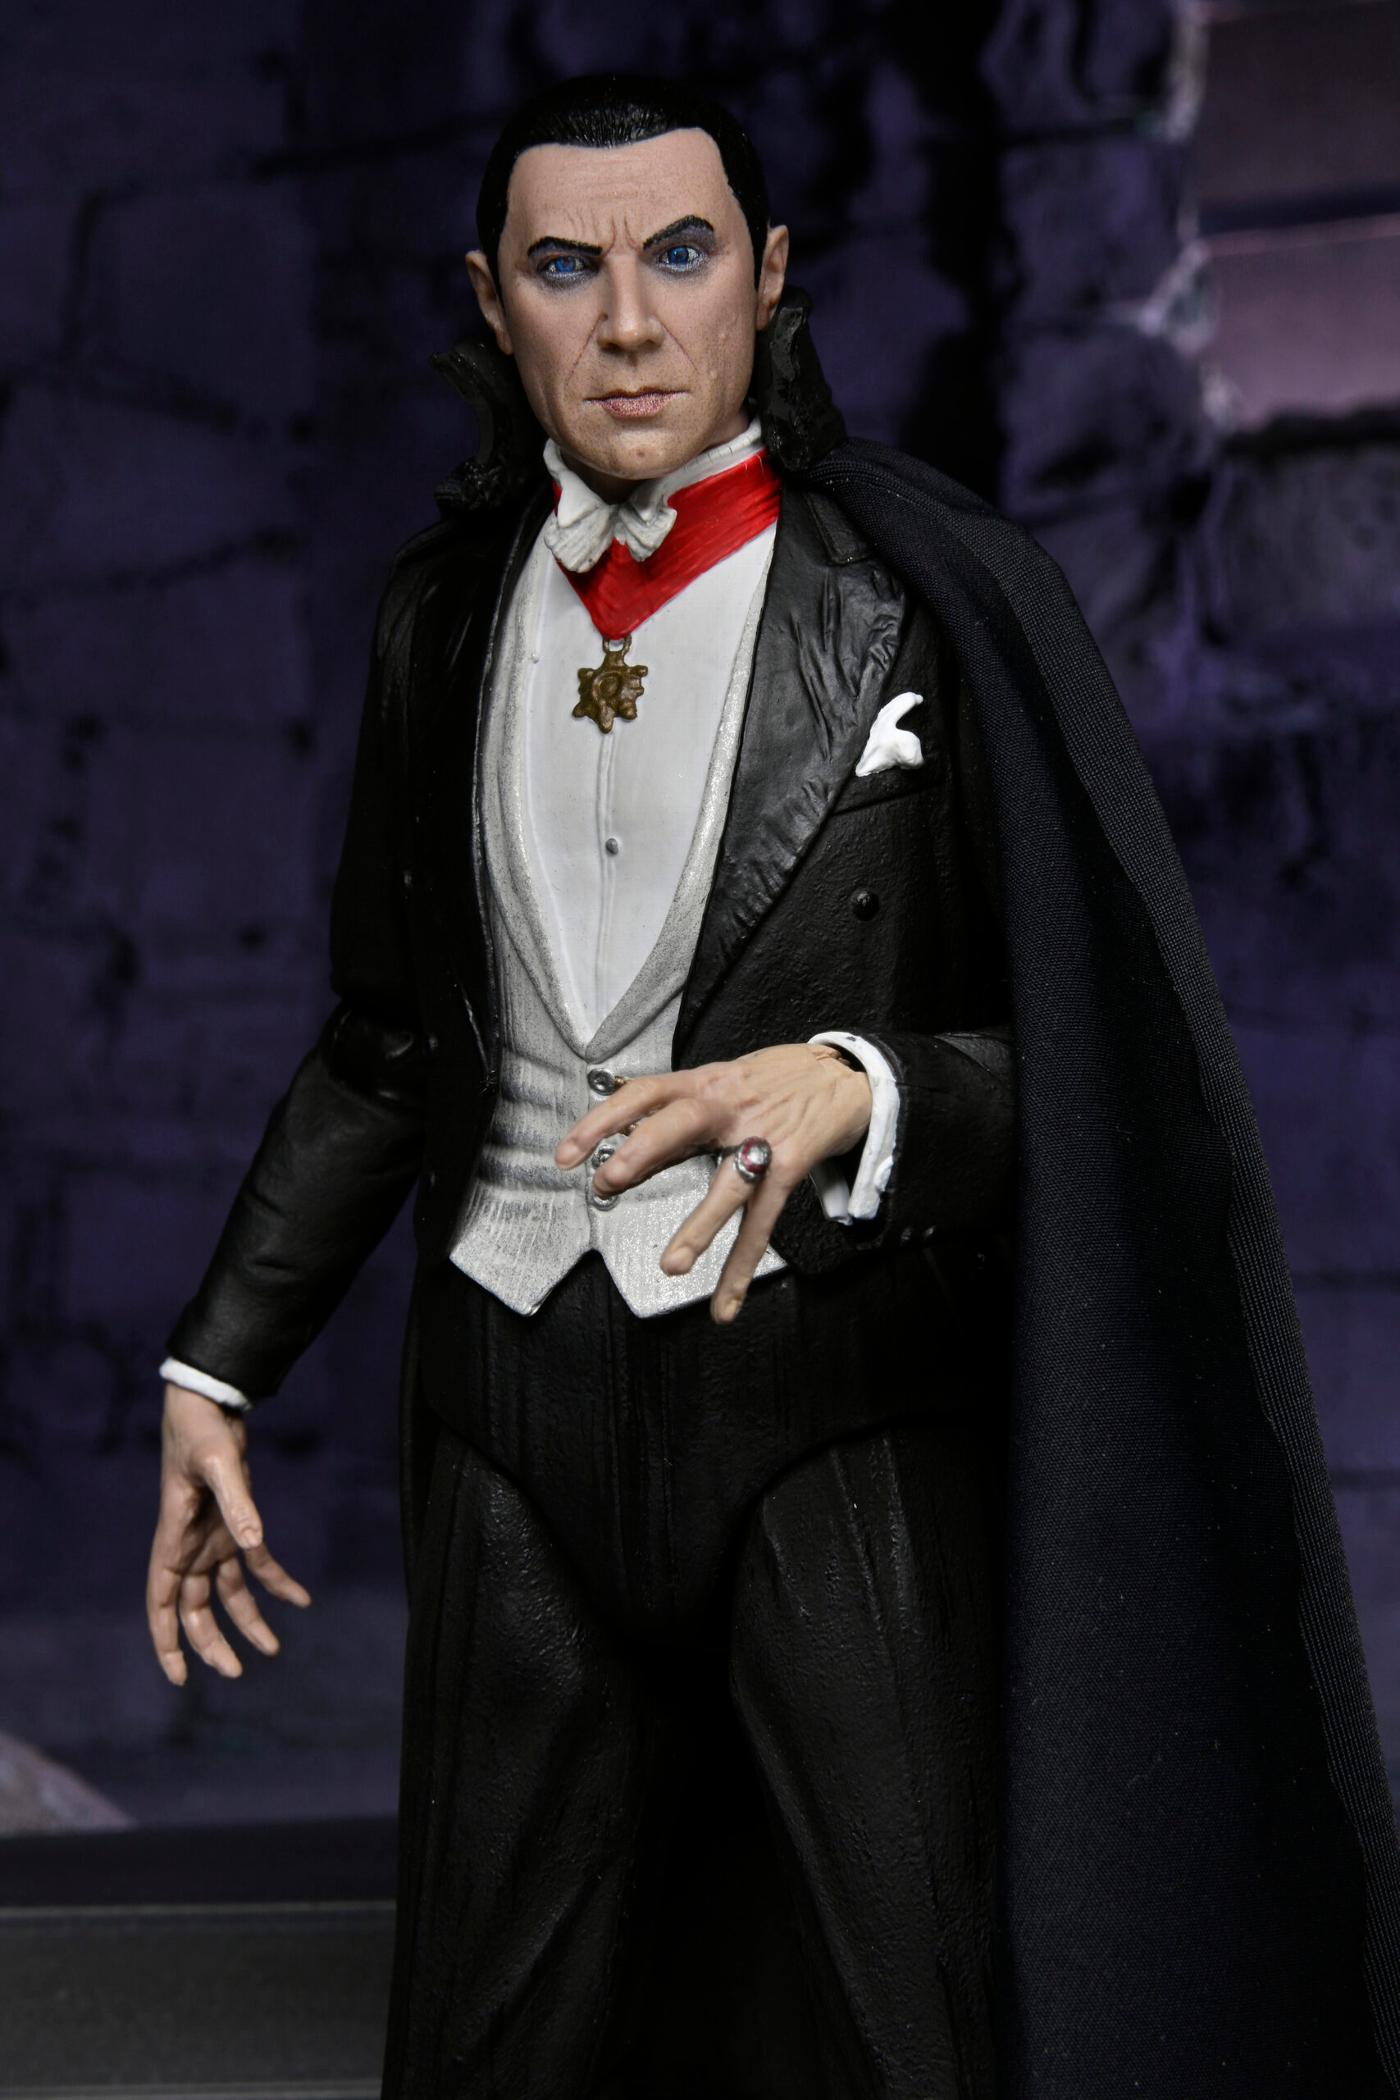 Universal Monsters:
7? Scale Action Figure – Ultimate Dracula (Transylvania)